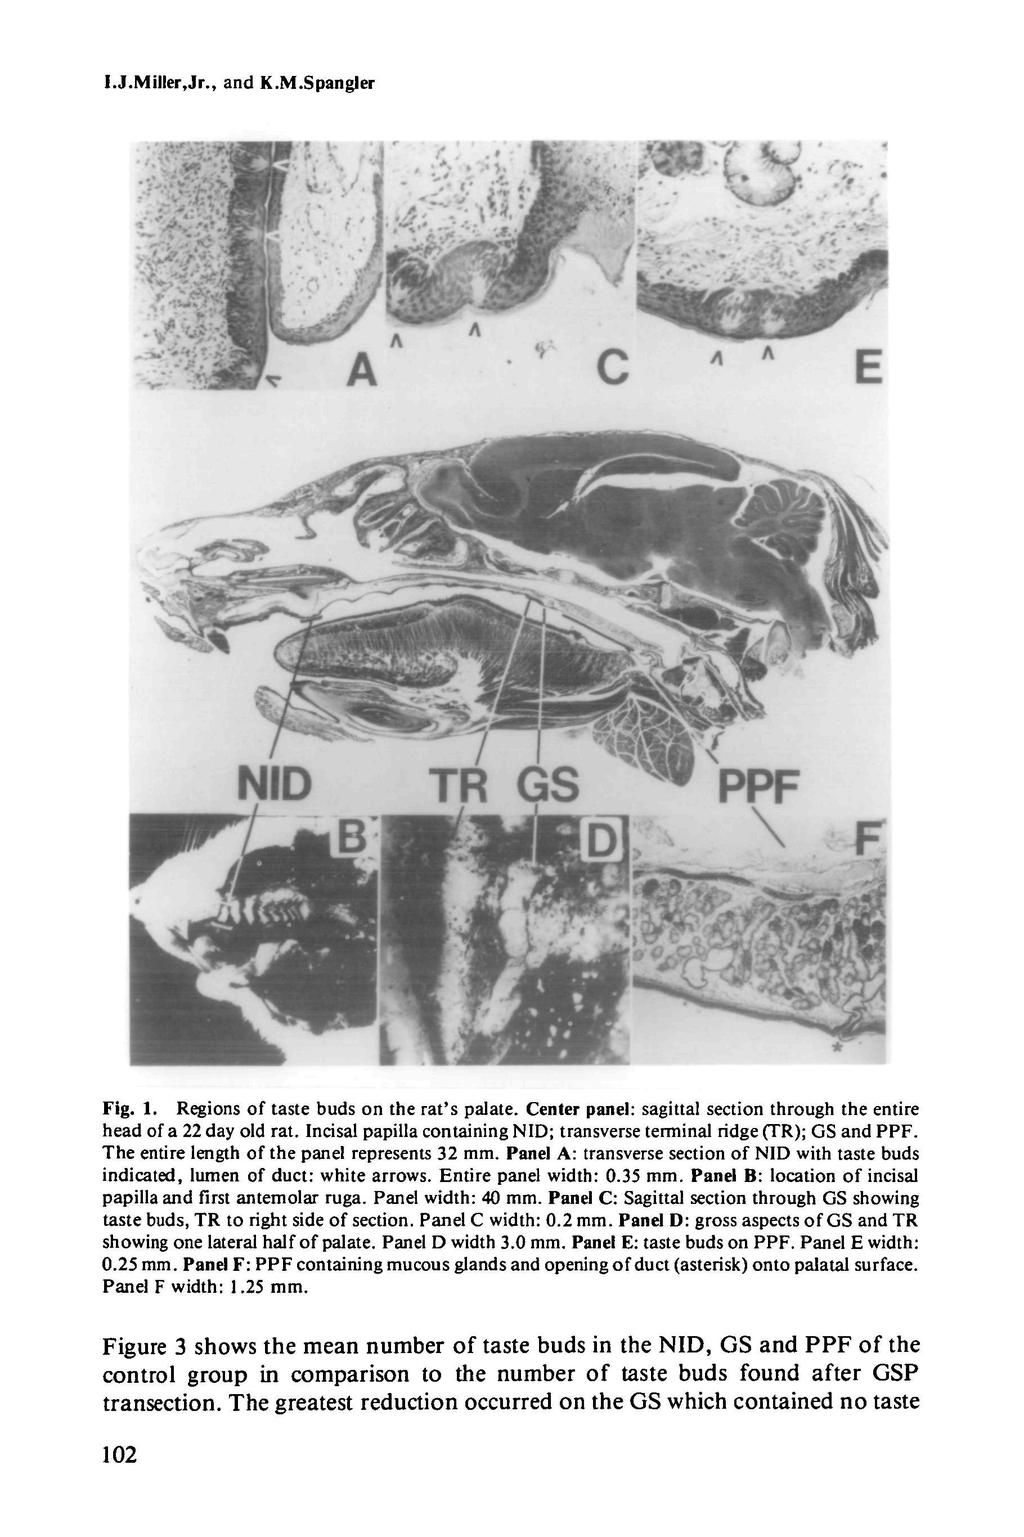 l.j.miller,jr., and K.M.Spangler Fig. 1. Regions of taste buds on the rat's palate. Center panel: sagittal section through the entire head of a 22 day old rat.